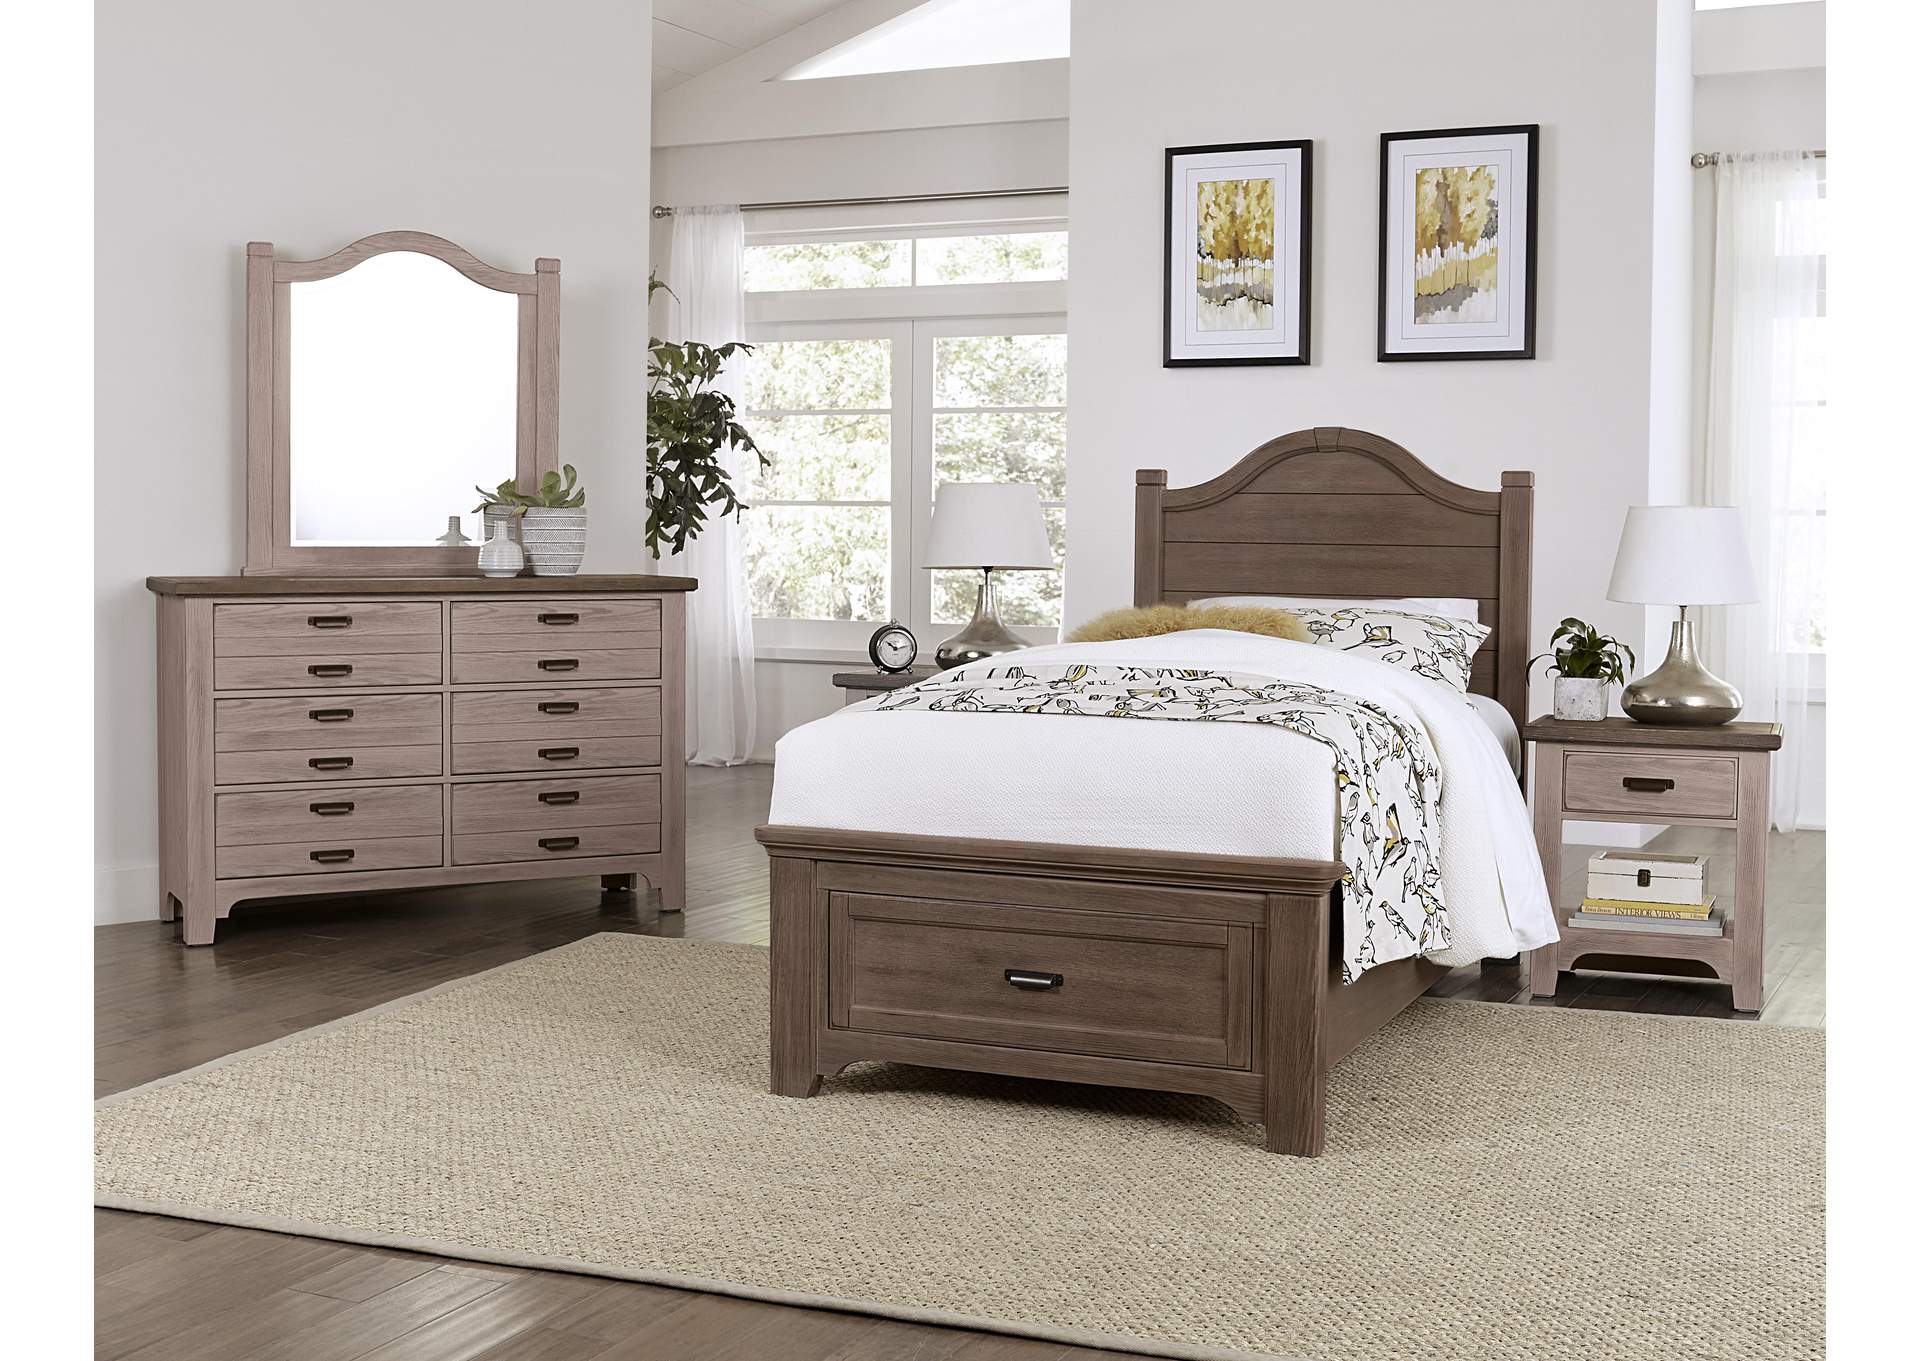 Bungalow Dover Grey with Folkstone Top Double Dresser - 6 Drawer,Vaughan-Bassett